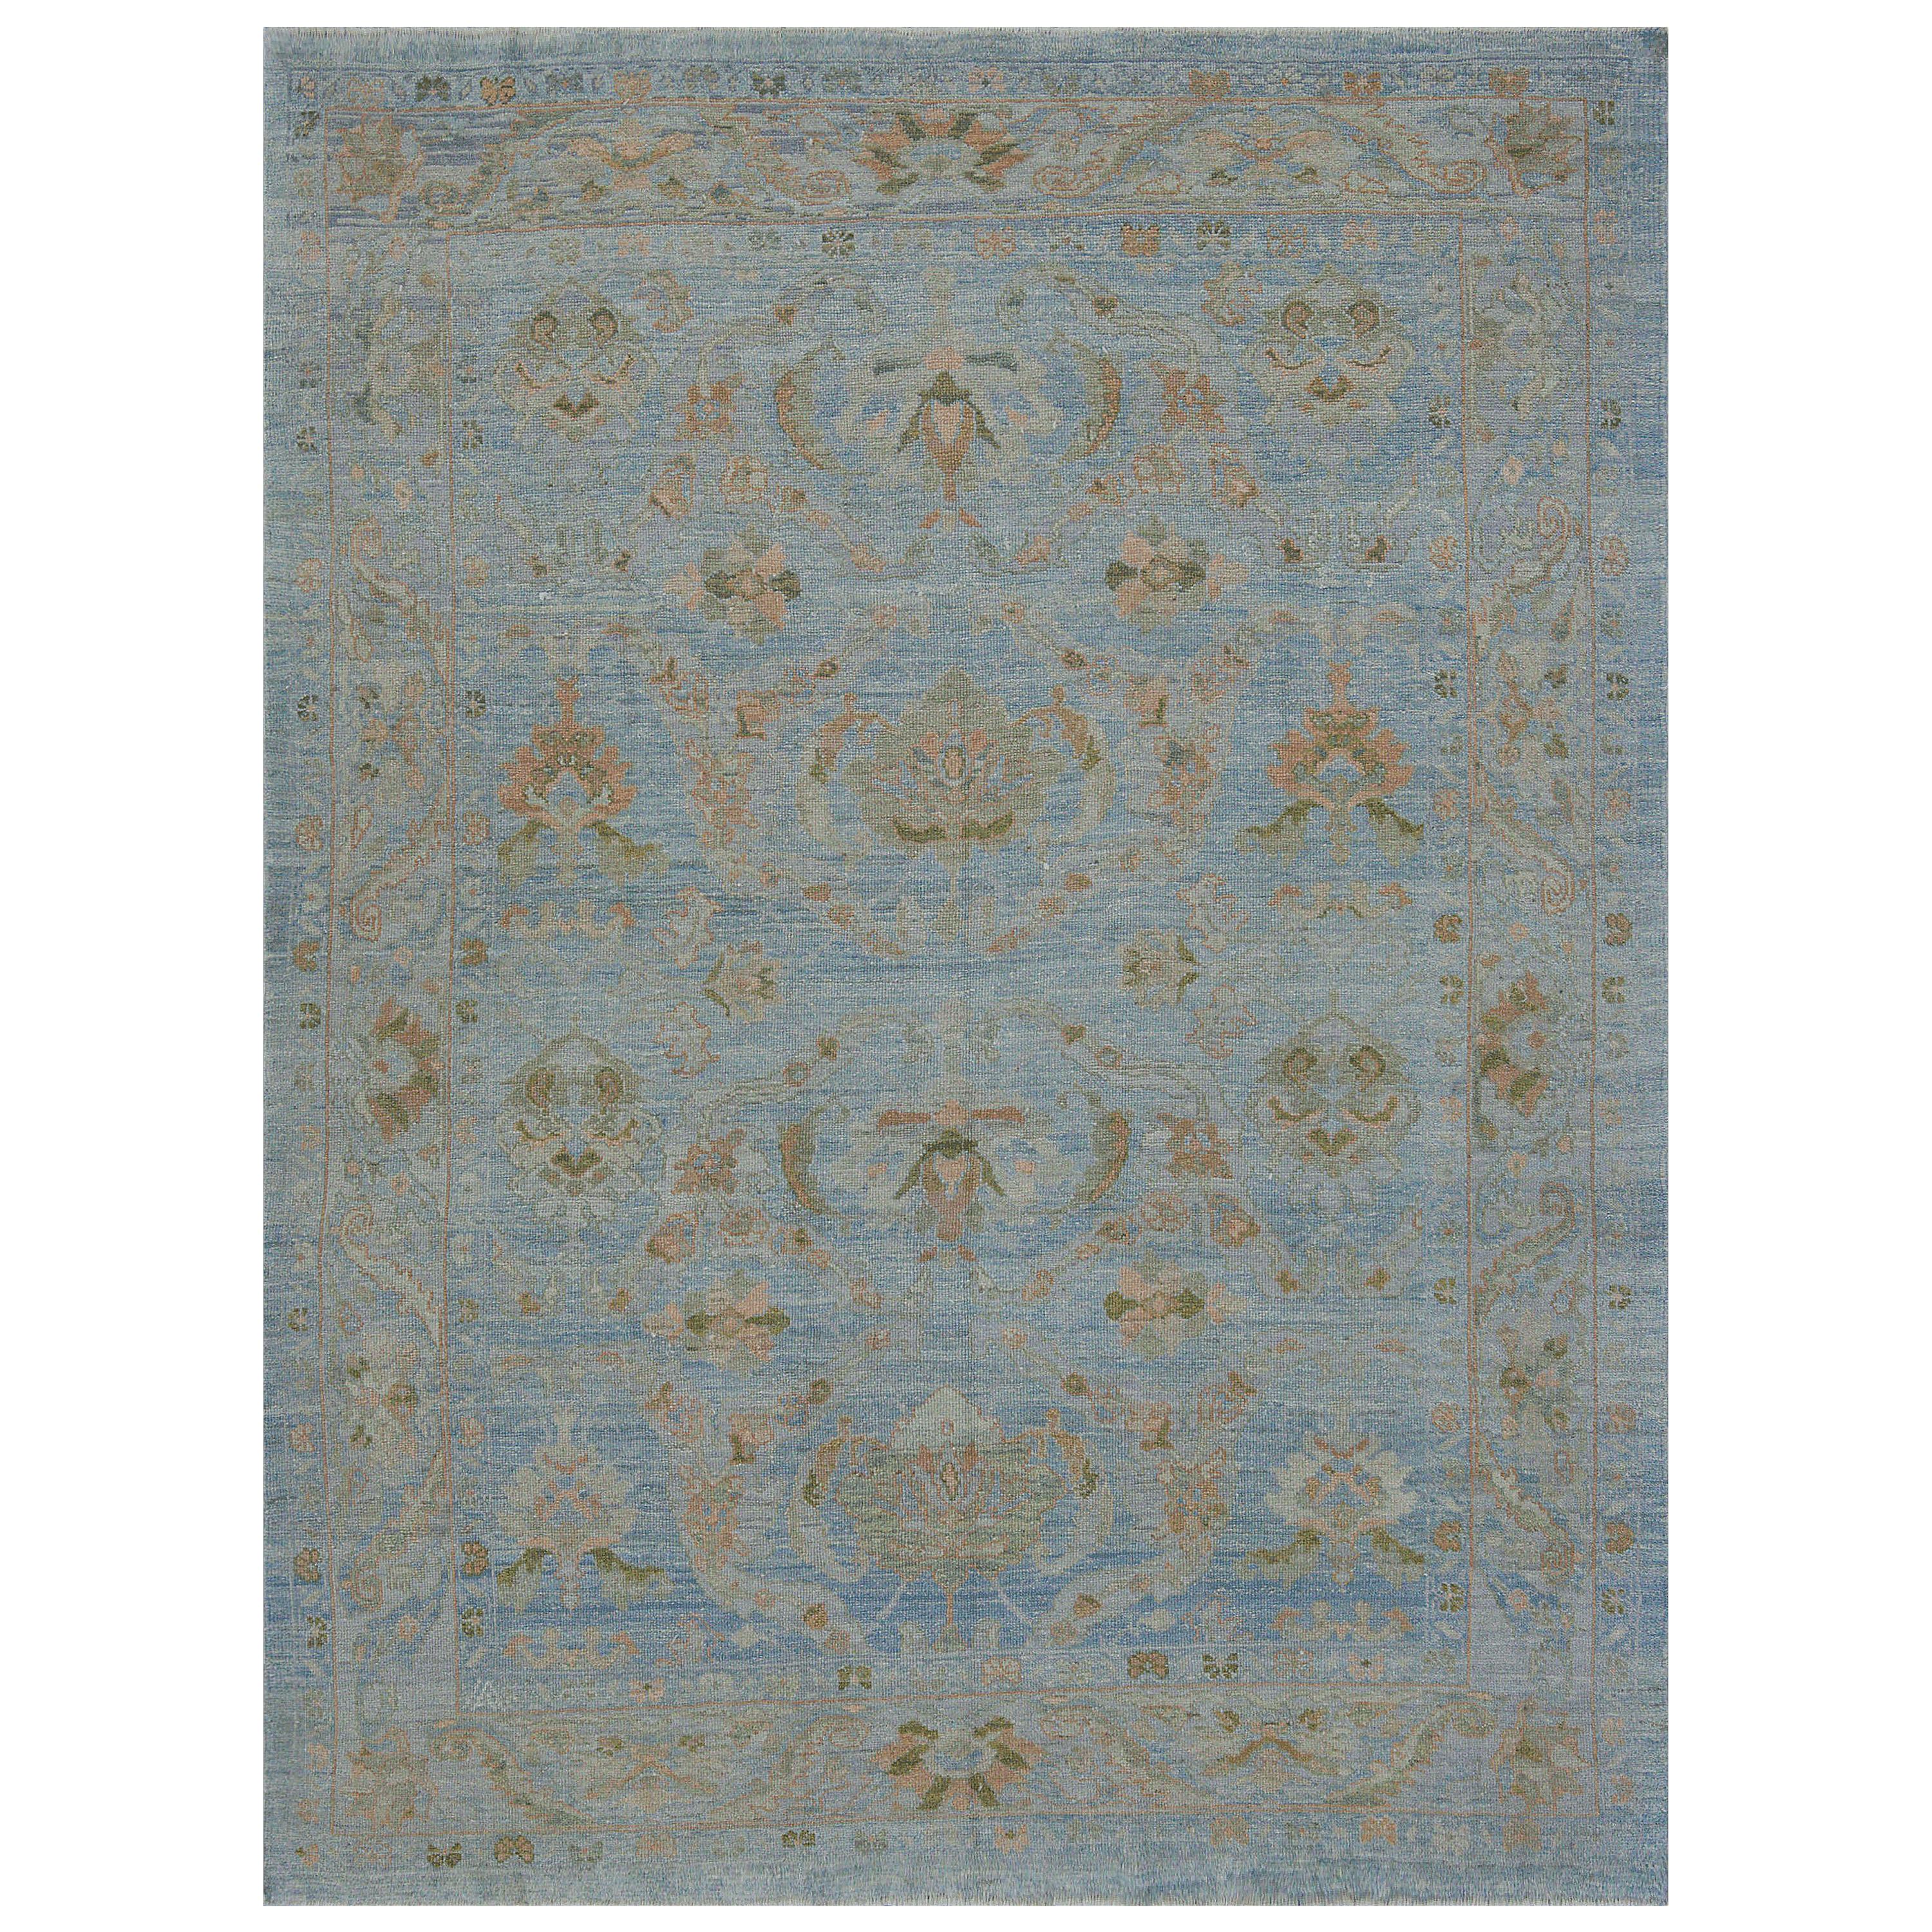 Modern Oushak Rug with Floral Details in Pink and Gray on Blue Field